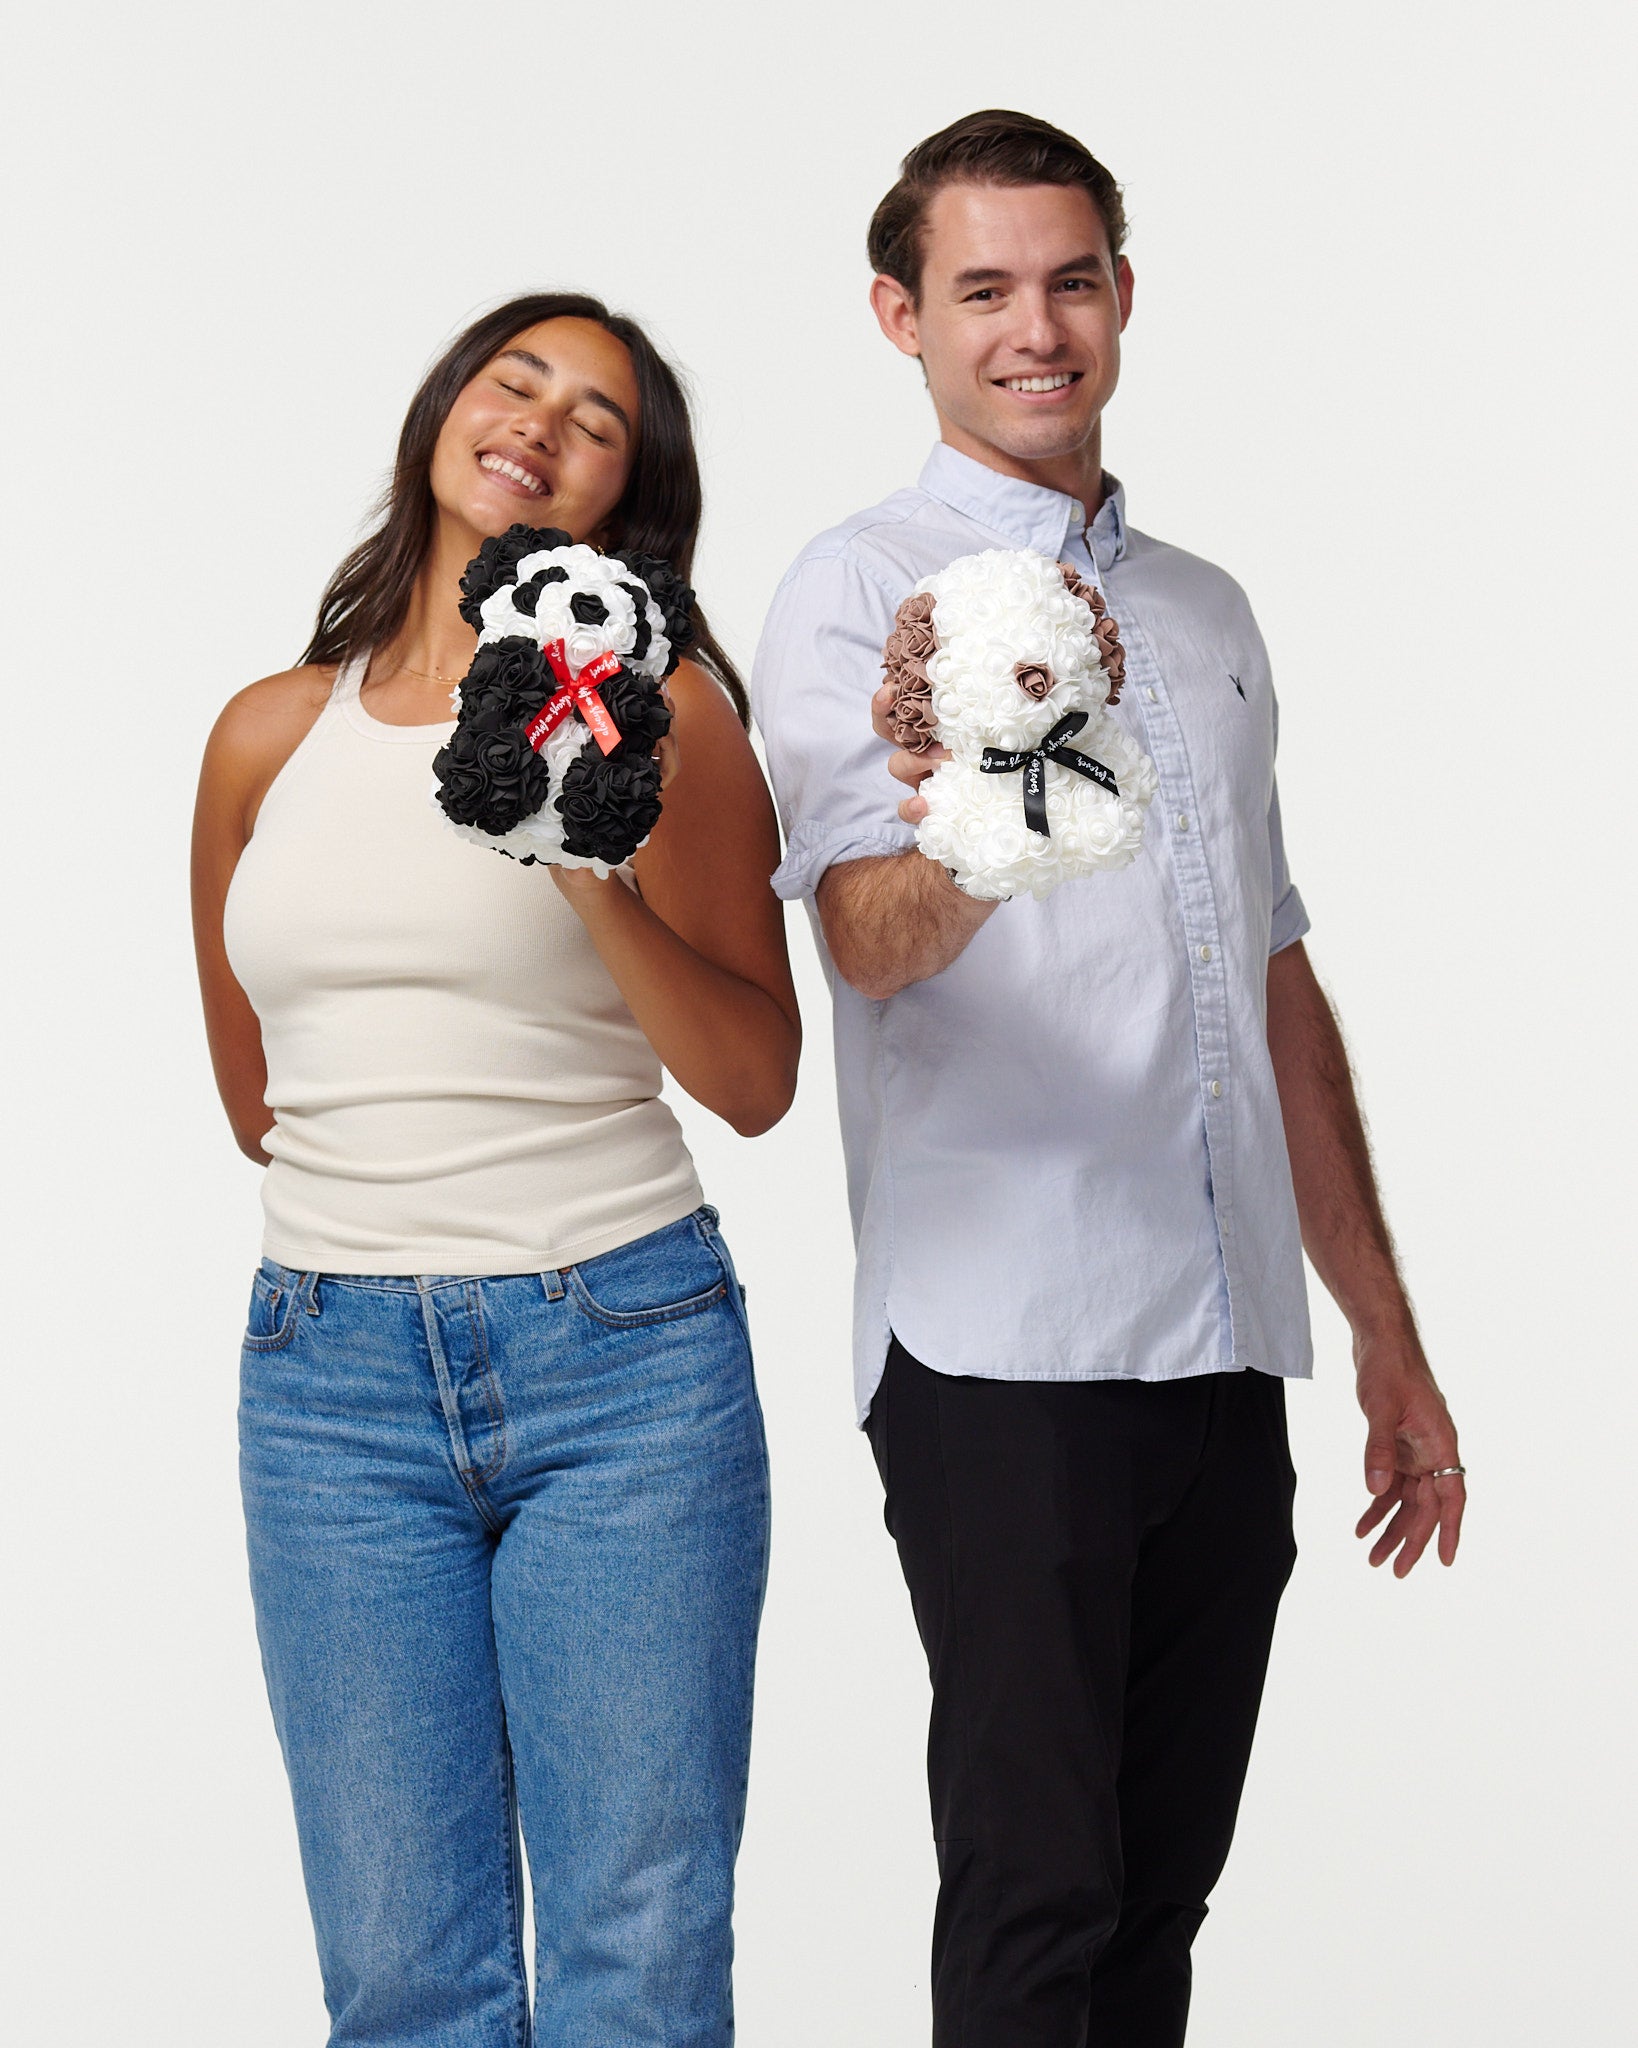 The image depicts a female model in a beige tank top and blue jeans, with her eyes closed and a content smile, holding a black and white flower panda with a red ribbon. Beside her, a male model in a light blue shirt and black pants smiles at the camera, holding a white flower bear with a black ribbon. Both models are presenting the artificial flower animals as treasured items, suggesting a joyful and affectionate context